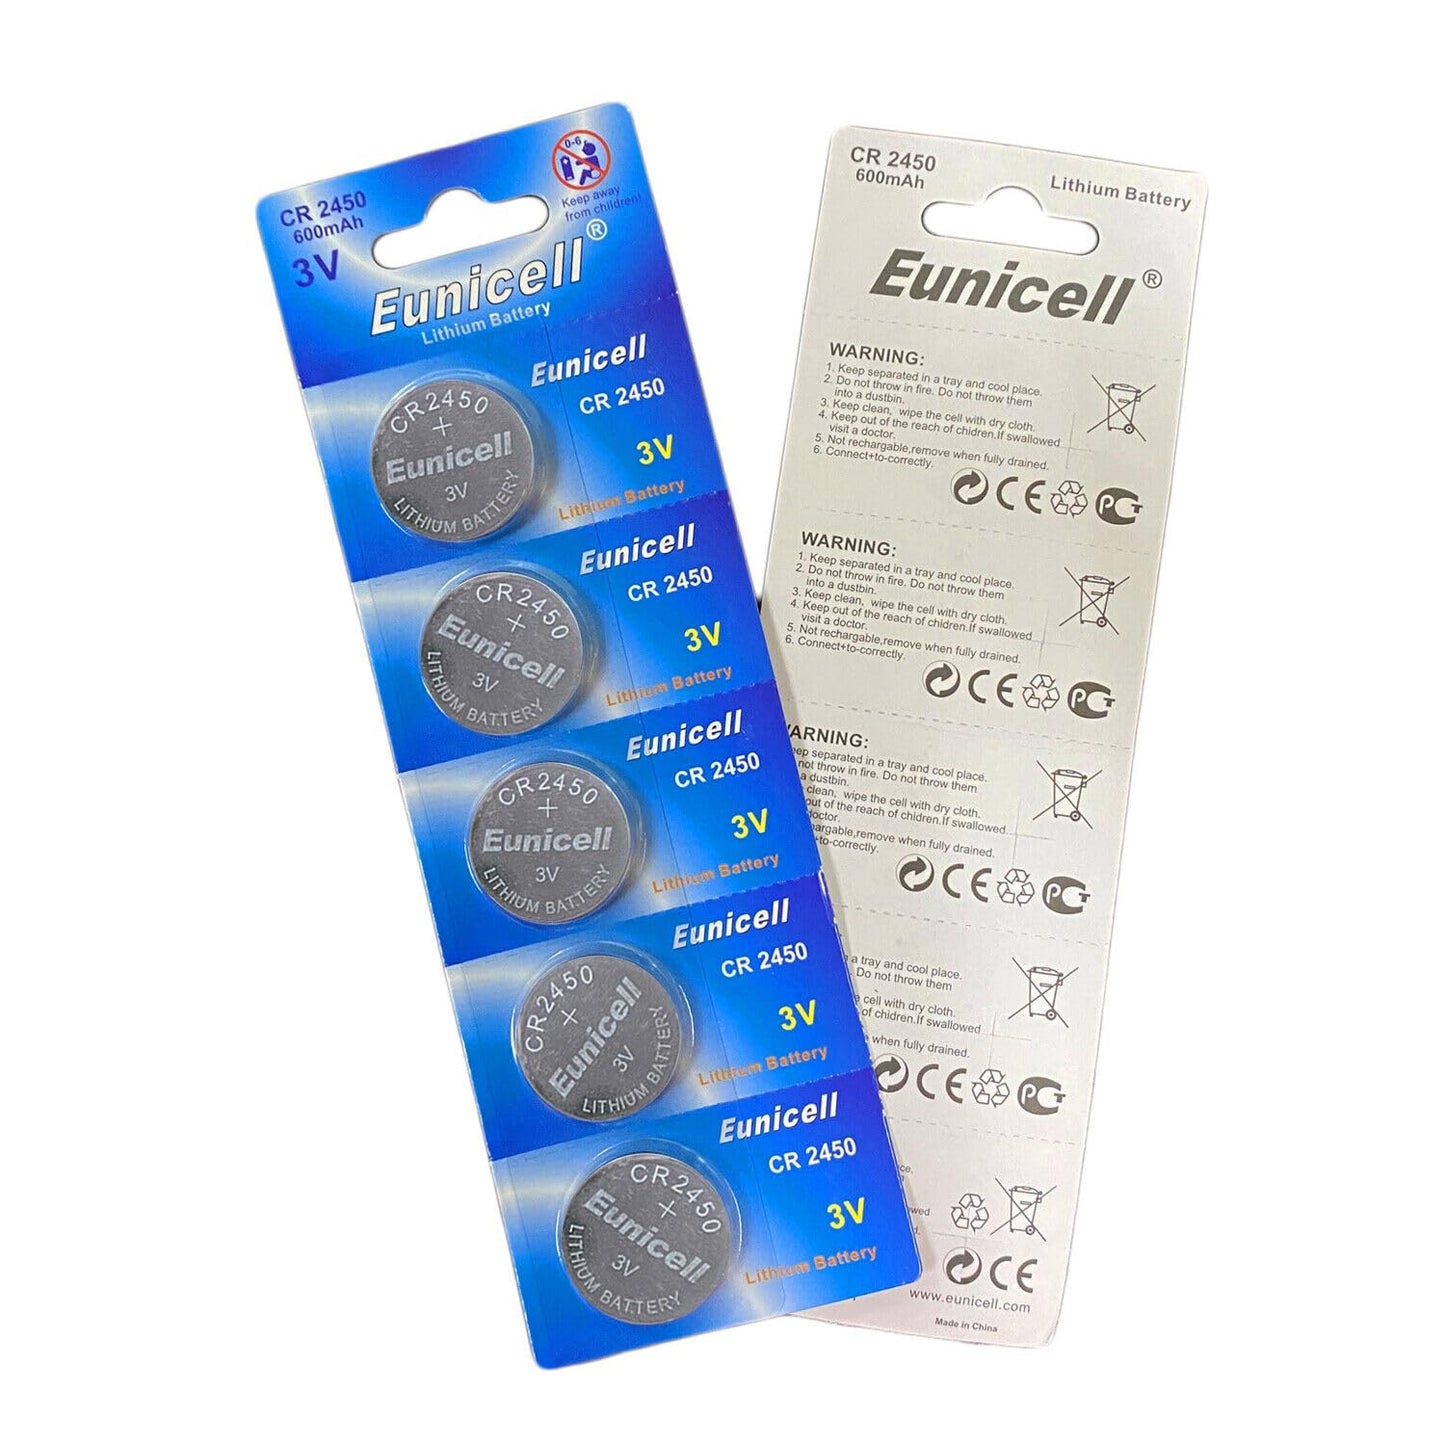 Eunicell - CR2450 3v lithium Coin Battery/Button Battery - (DL2450/CR2450) Suitable for use in LED lights